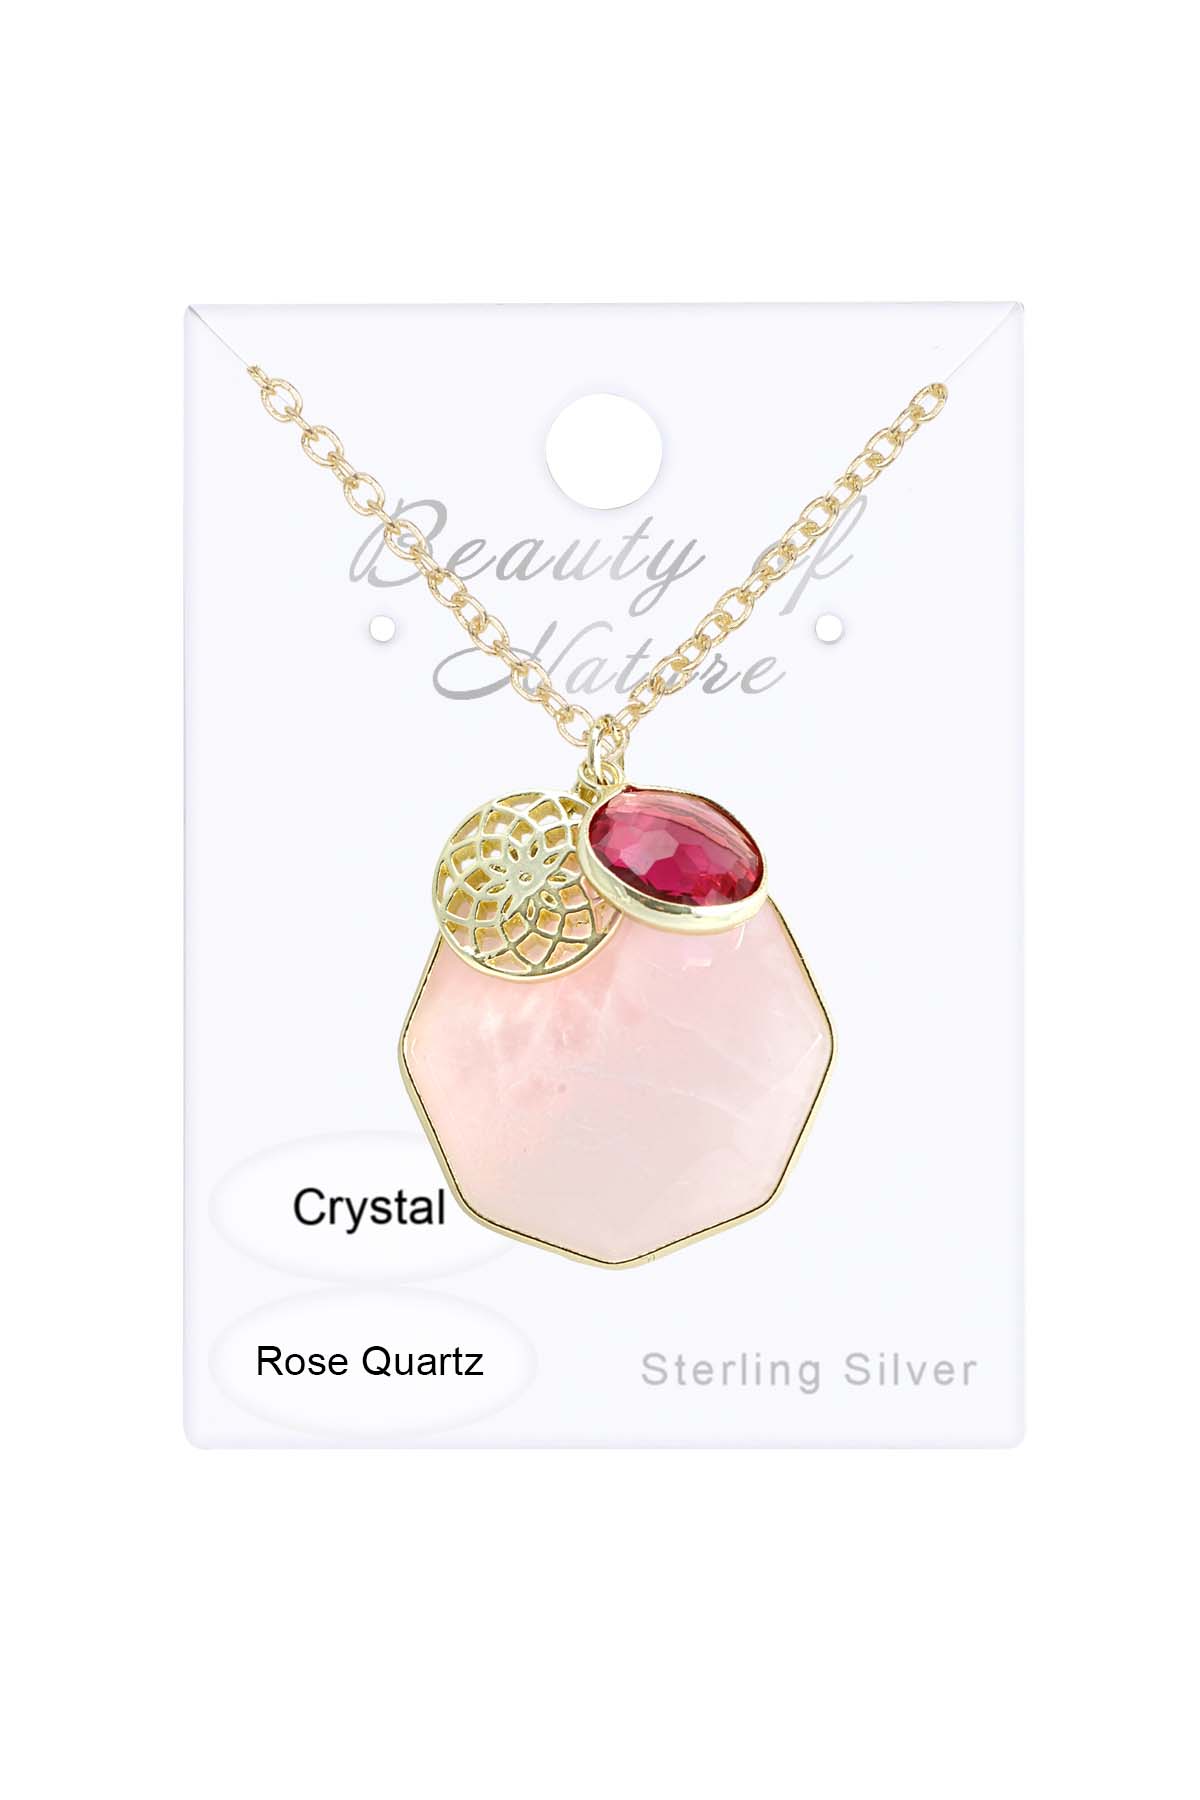 14k Gold Plated & Rose Quartz With Charm Necklace - GF